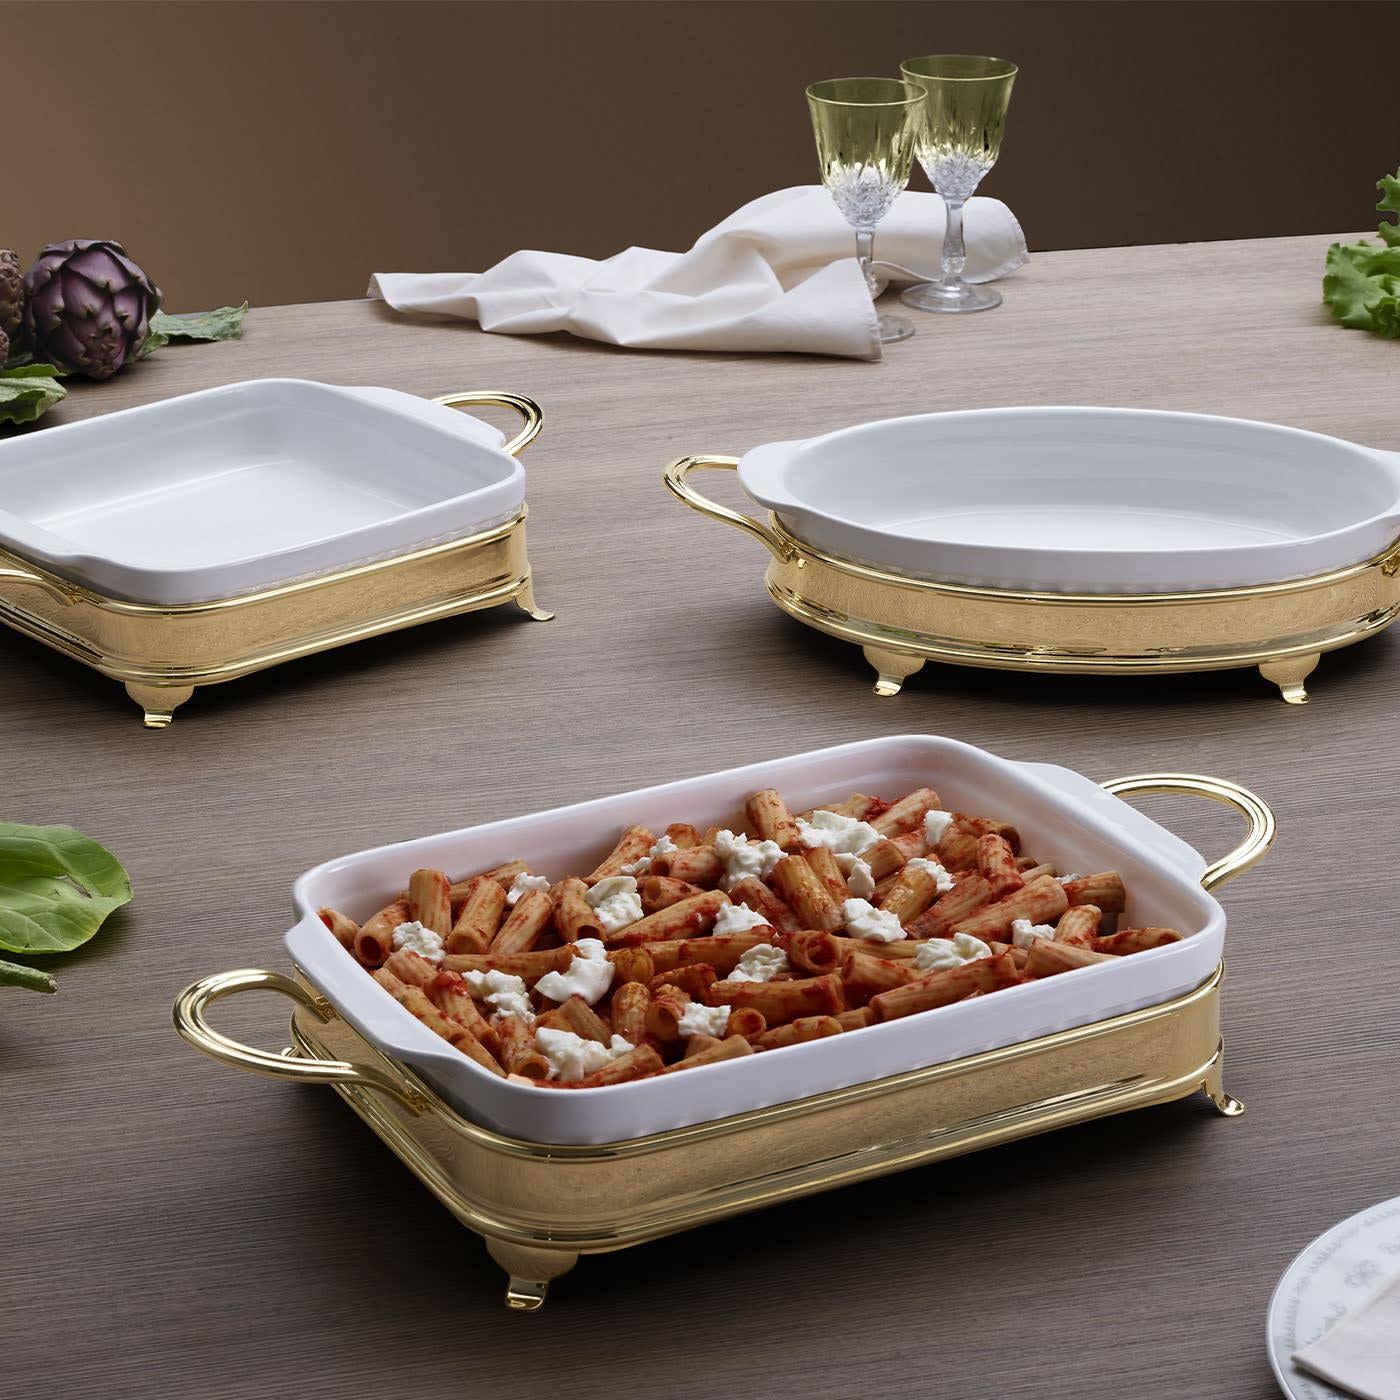 Designed for safely bringing hot food immediately to the table without renouncing elegance, this set comprises an oval baking dish in fine white ceramic and a luxurious golden-finished brass holder. Its tiny feet allow for avoiding contact with the